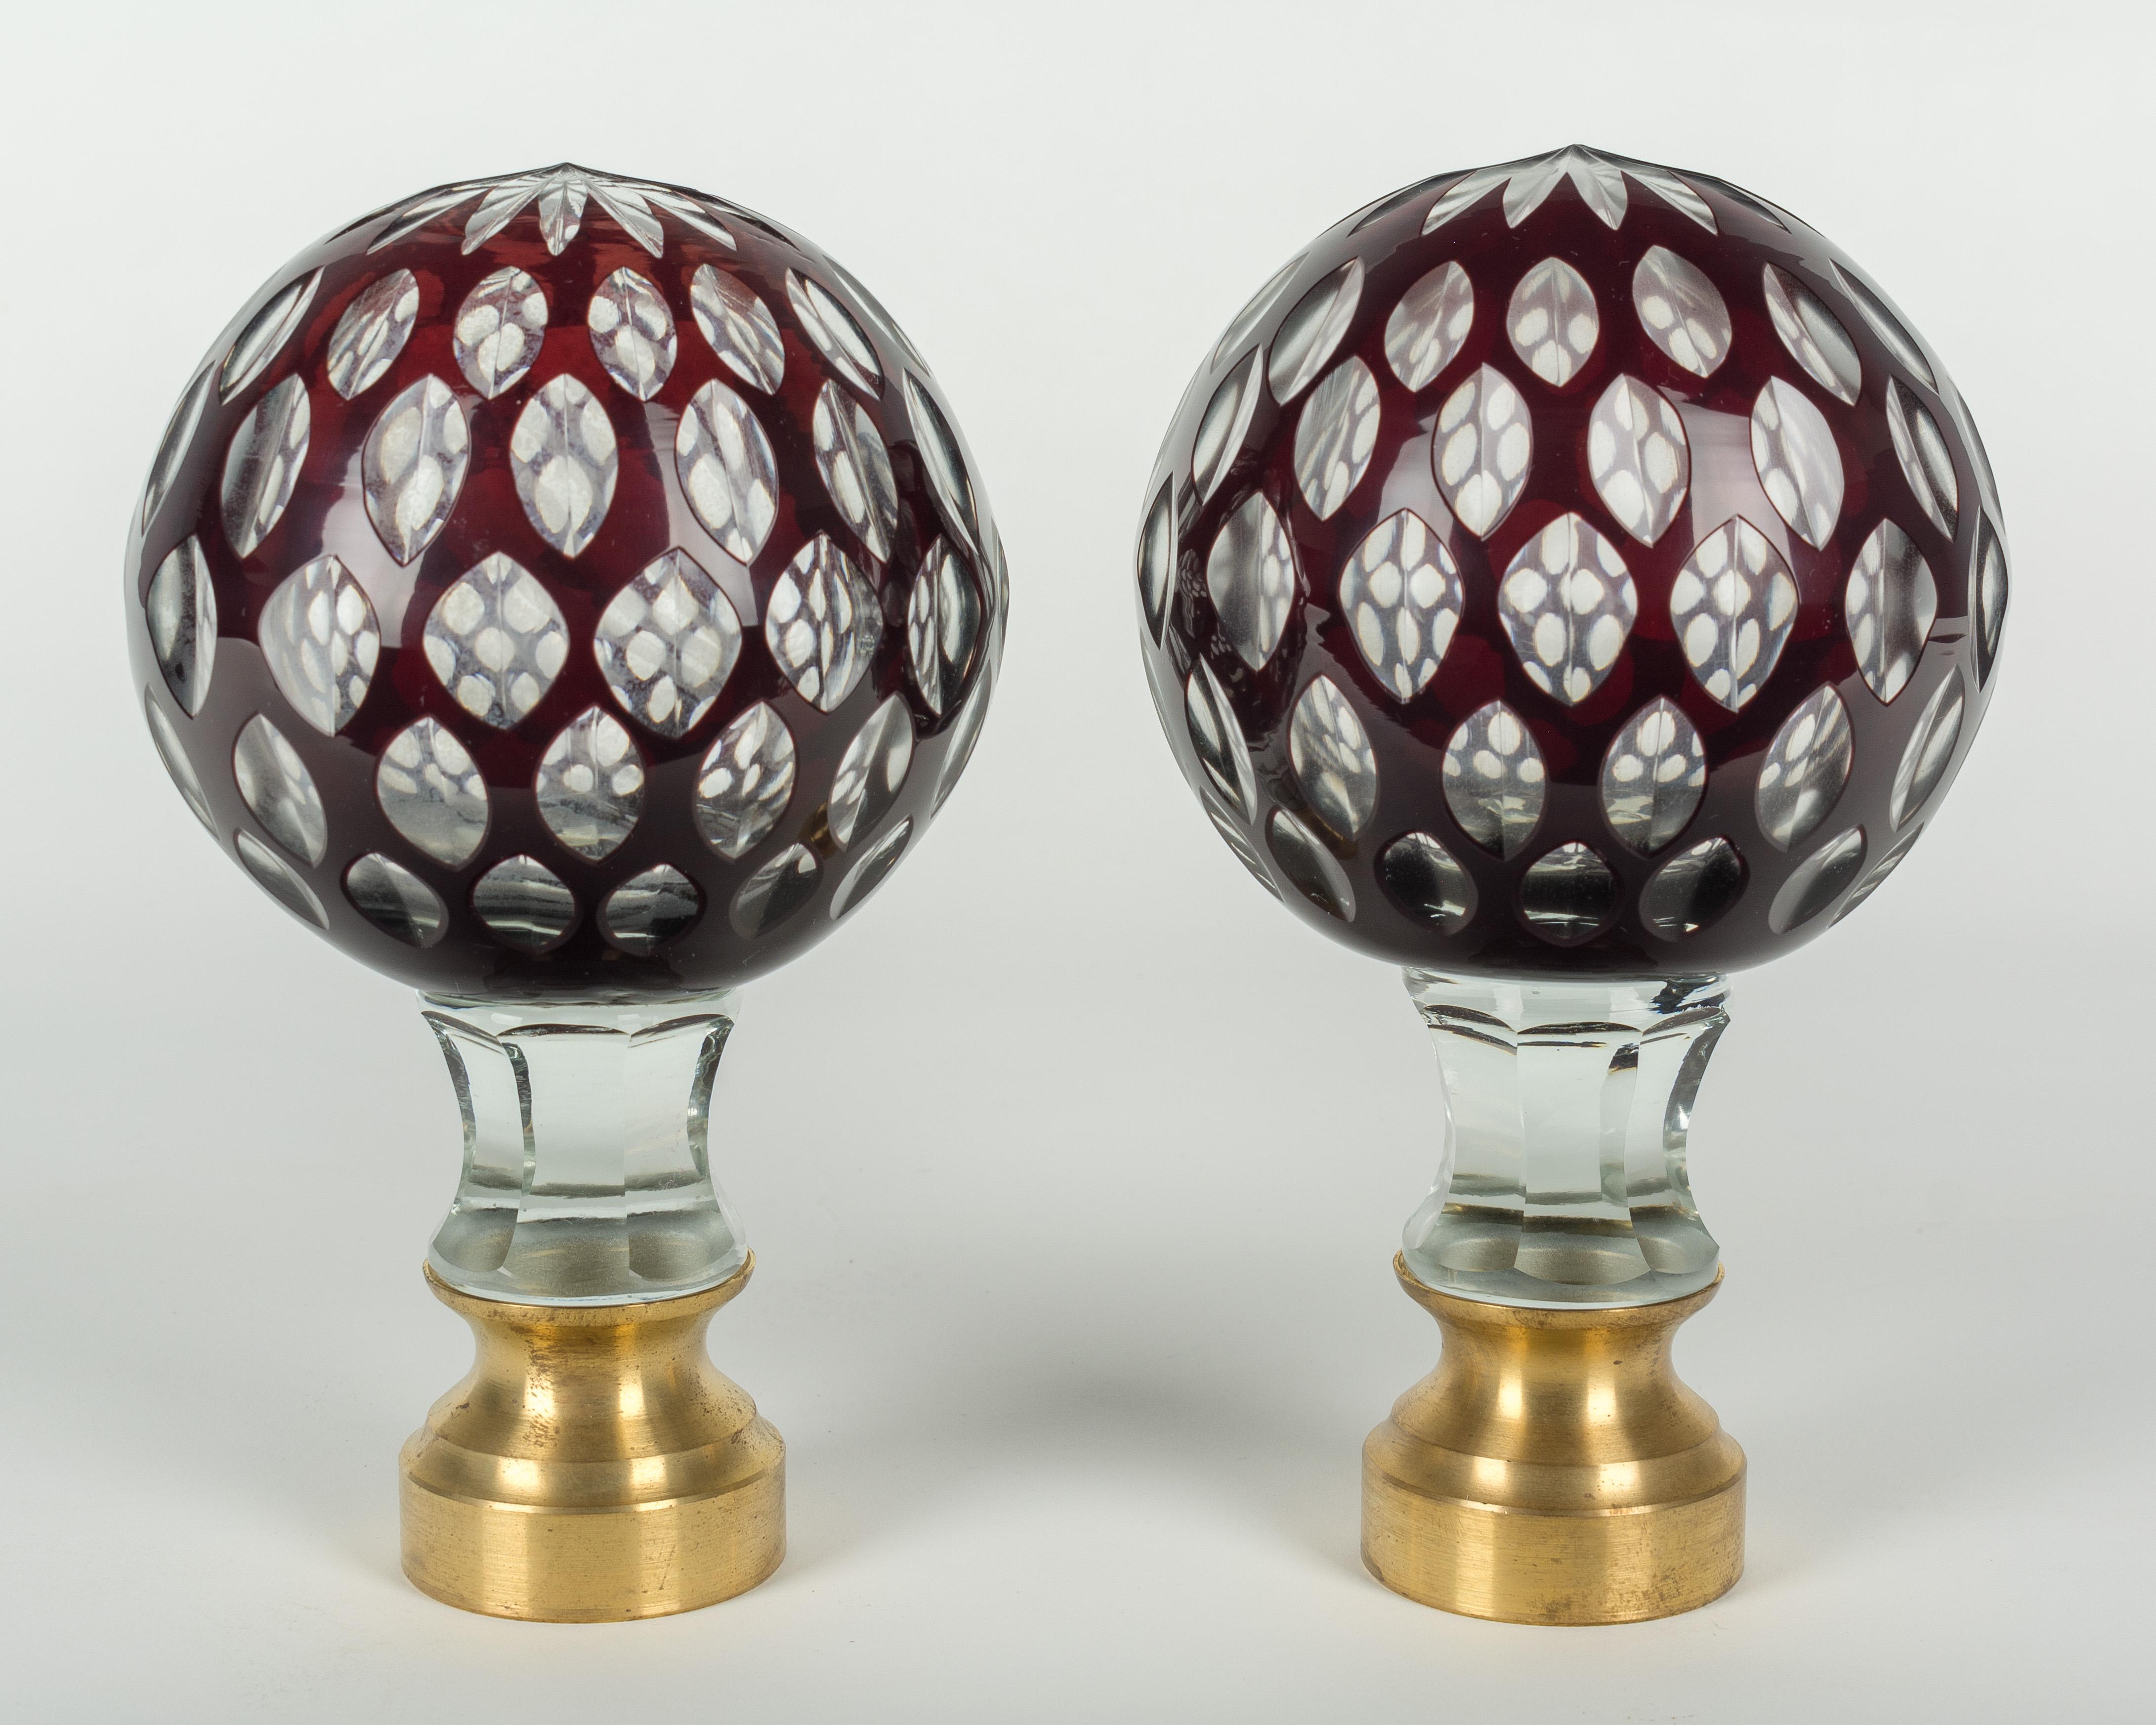 A pair of early 20th century French cut glass boules d'escalier, or newel post finials. Clear glass with an outer layer of deep ruby red and a multi-cut star at the top. These wonderful finials were used as decorative elements at the bottom of a